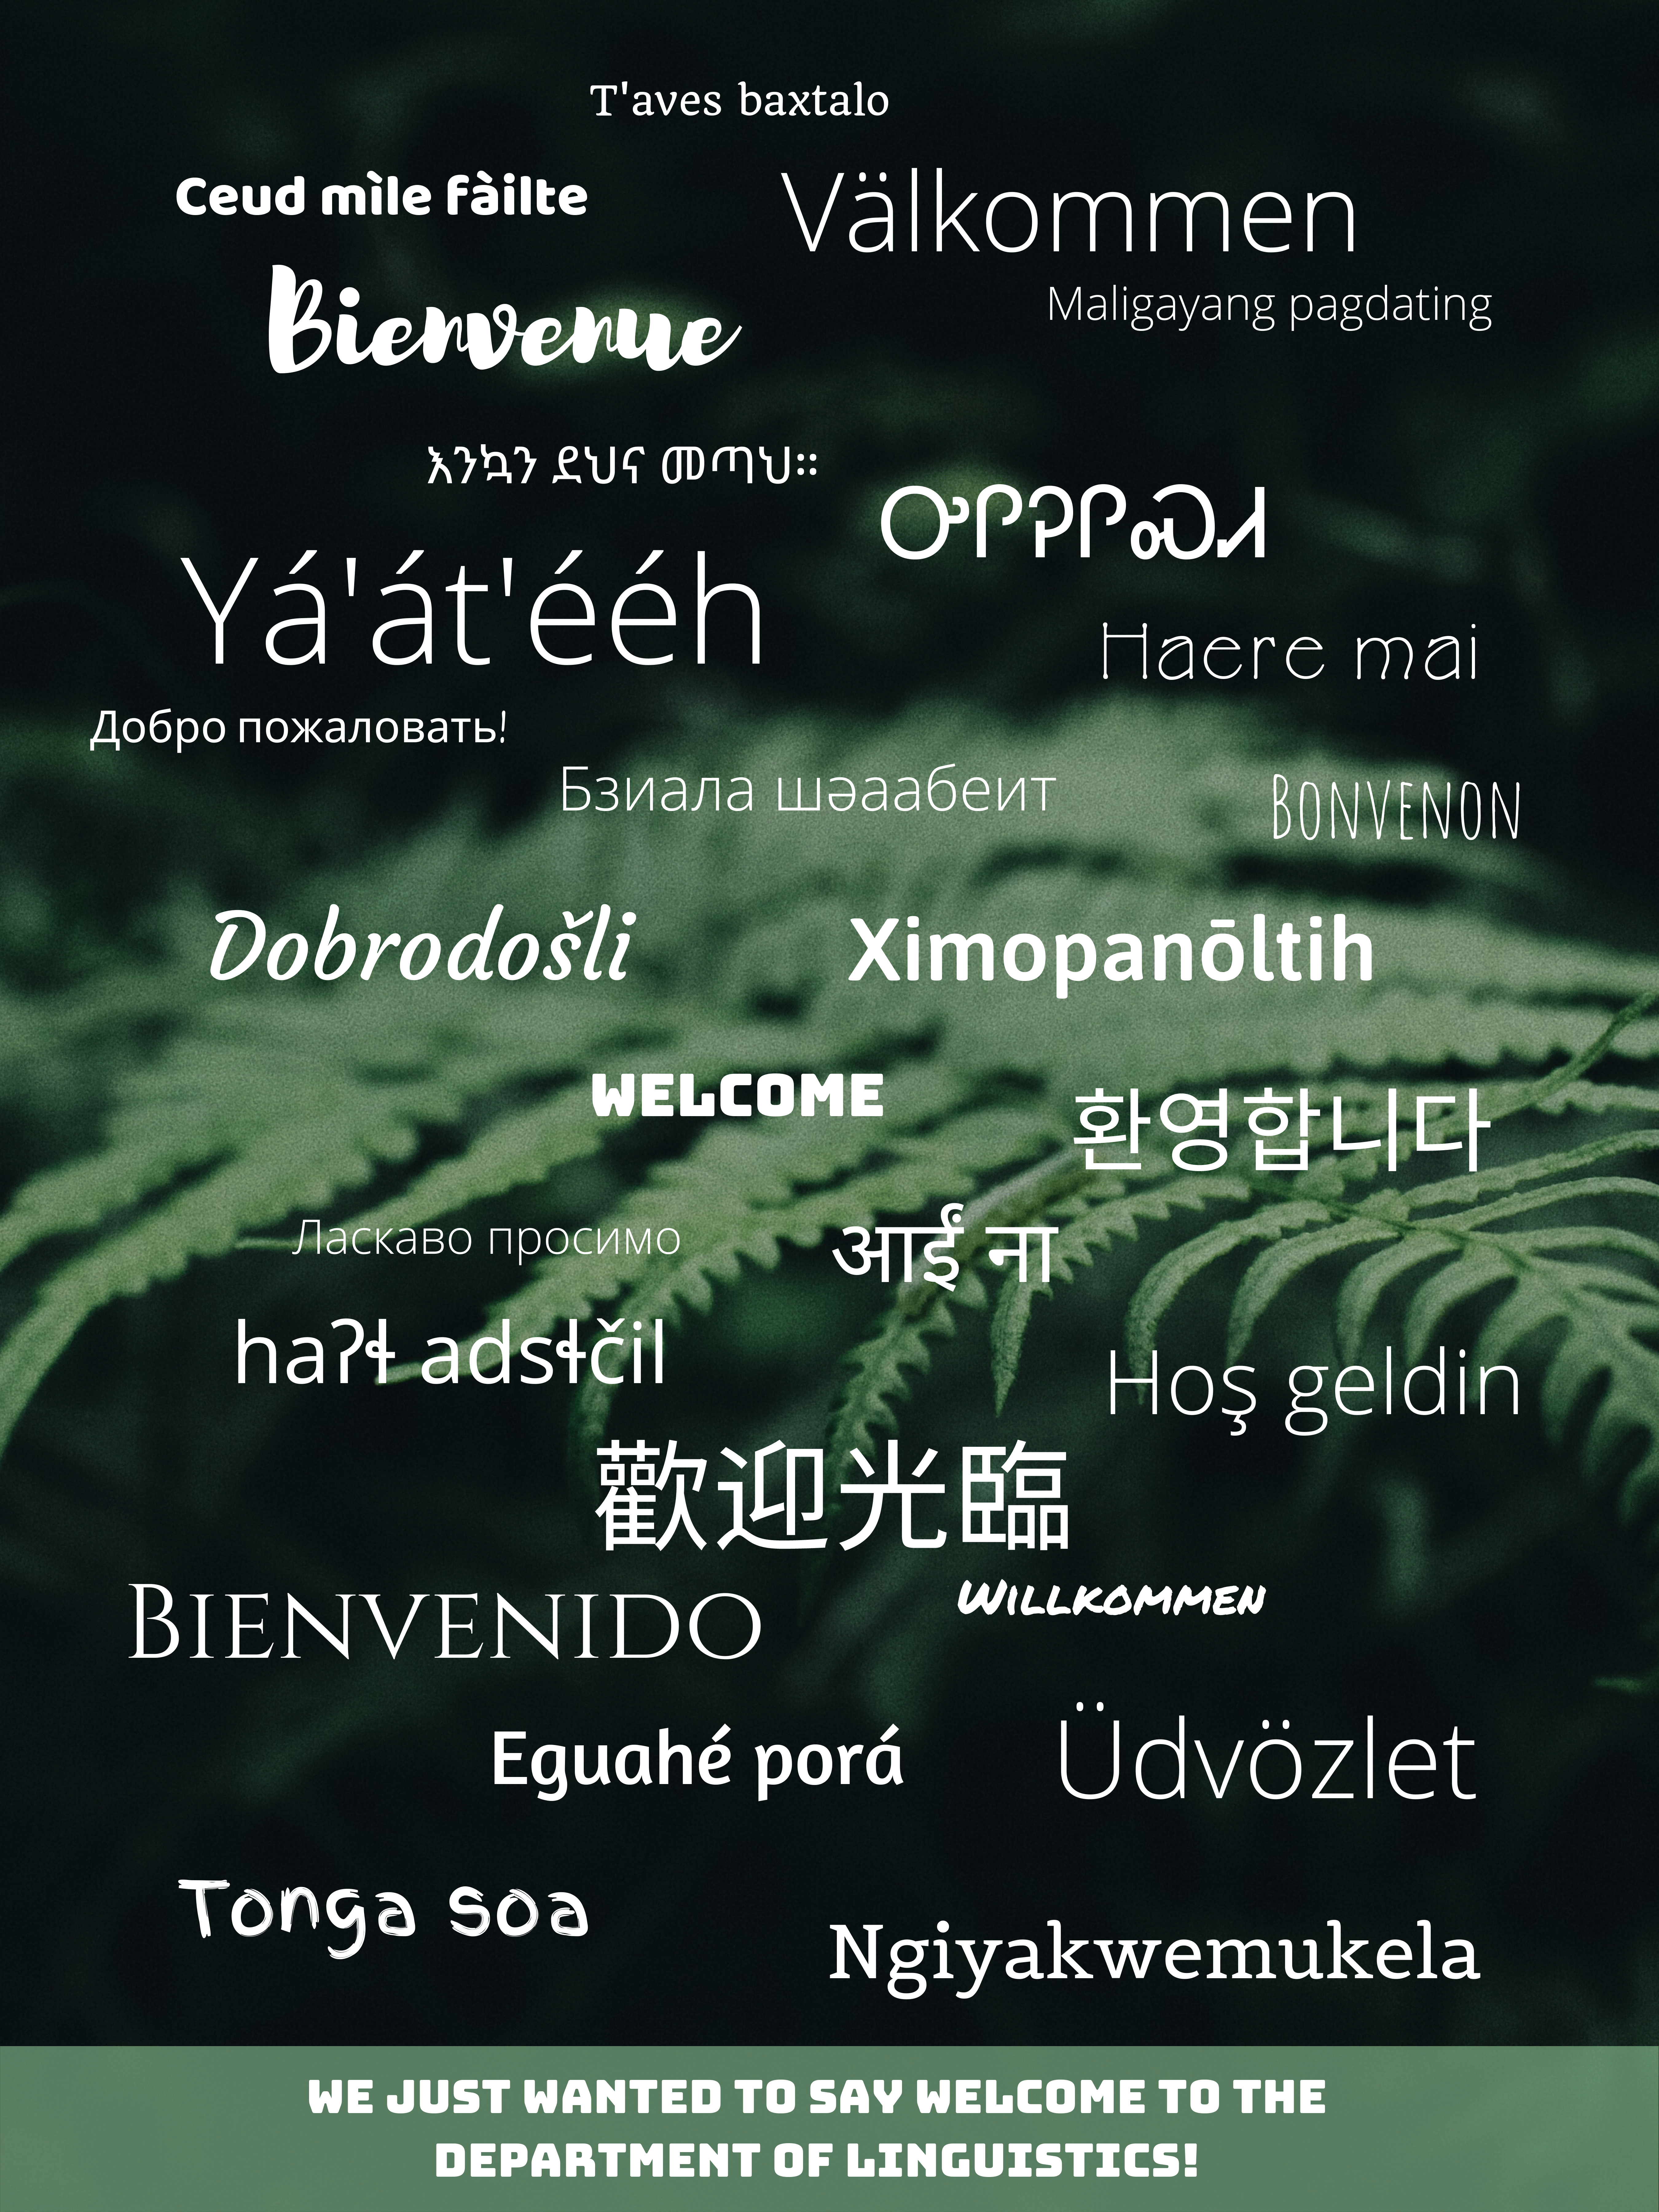 Linguistics Poster. "Welcome" in several different languages. See webpage for full description.